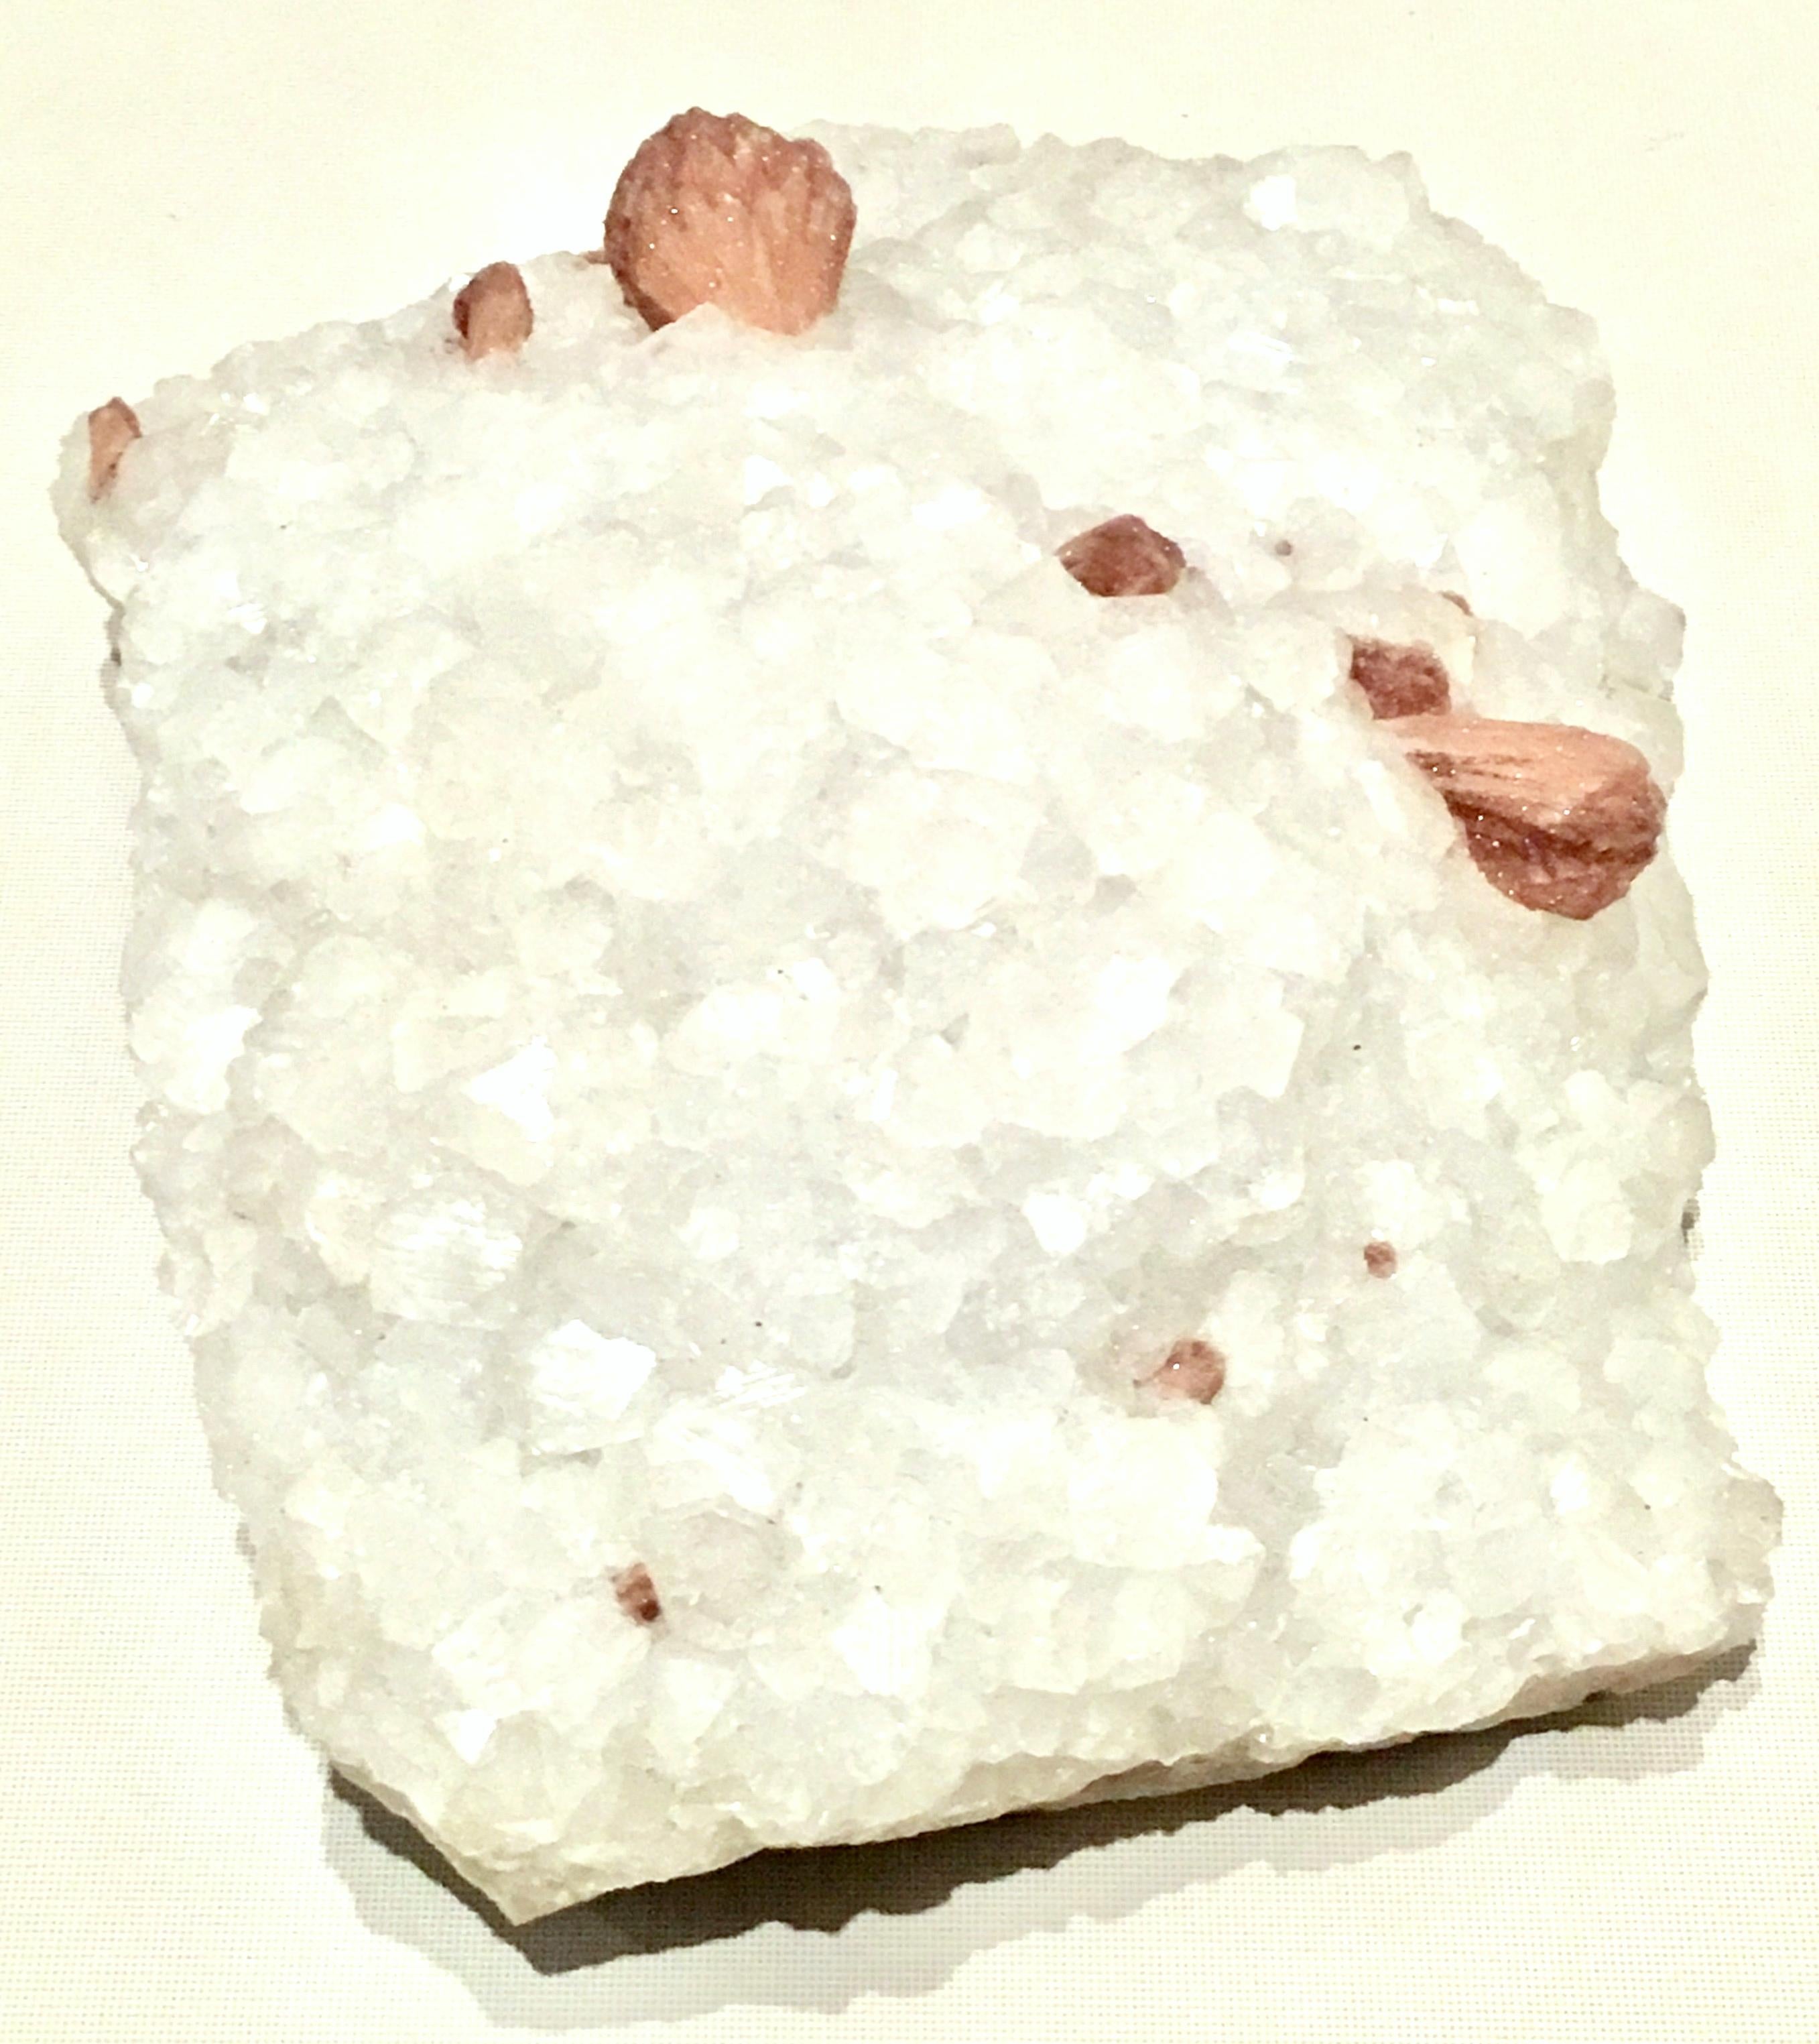 20th Century Monumental, Rare & One Of A Kind Vintage natural organic quartz geode rock sculpture. Being of natural crystal clear and salmon glistening hues this almost 15 pound piece of art will add drama and calm to any environment.